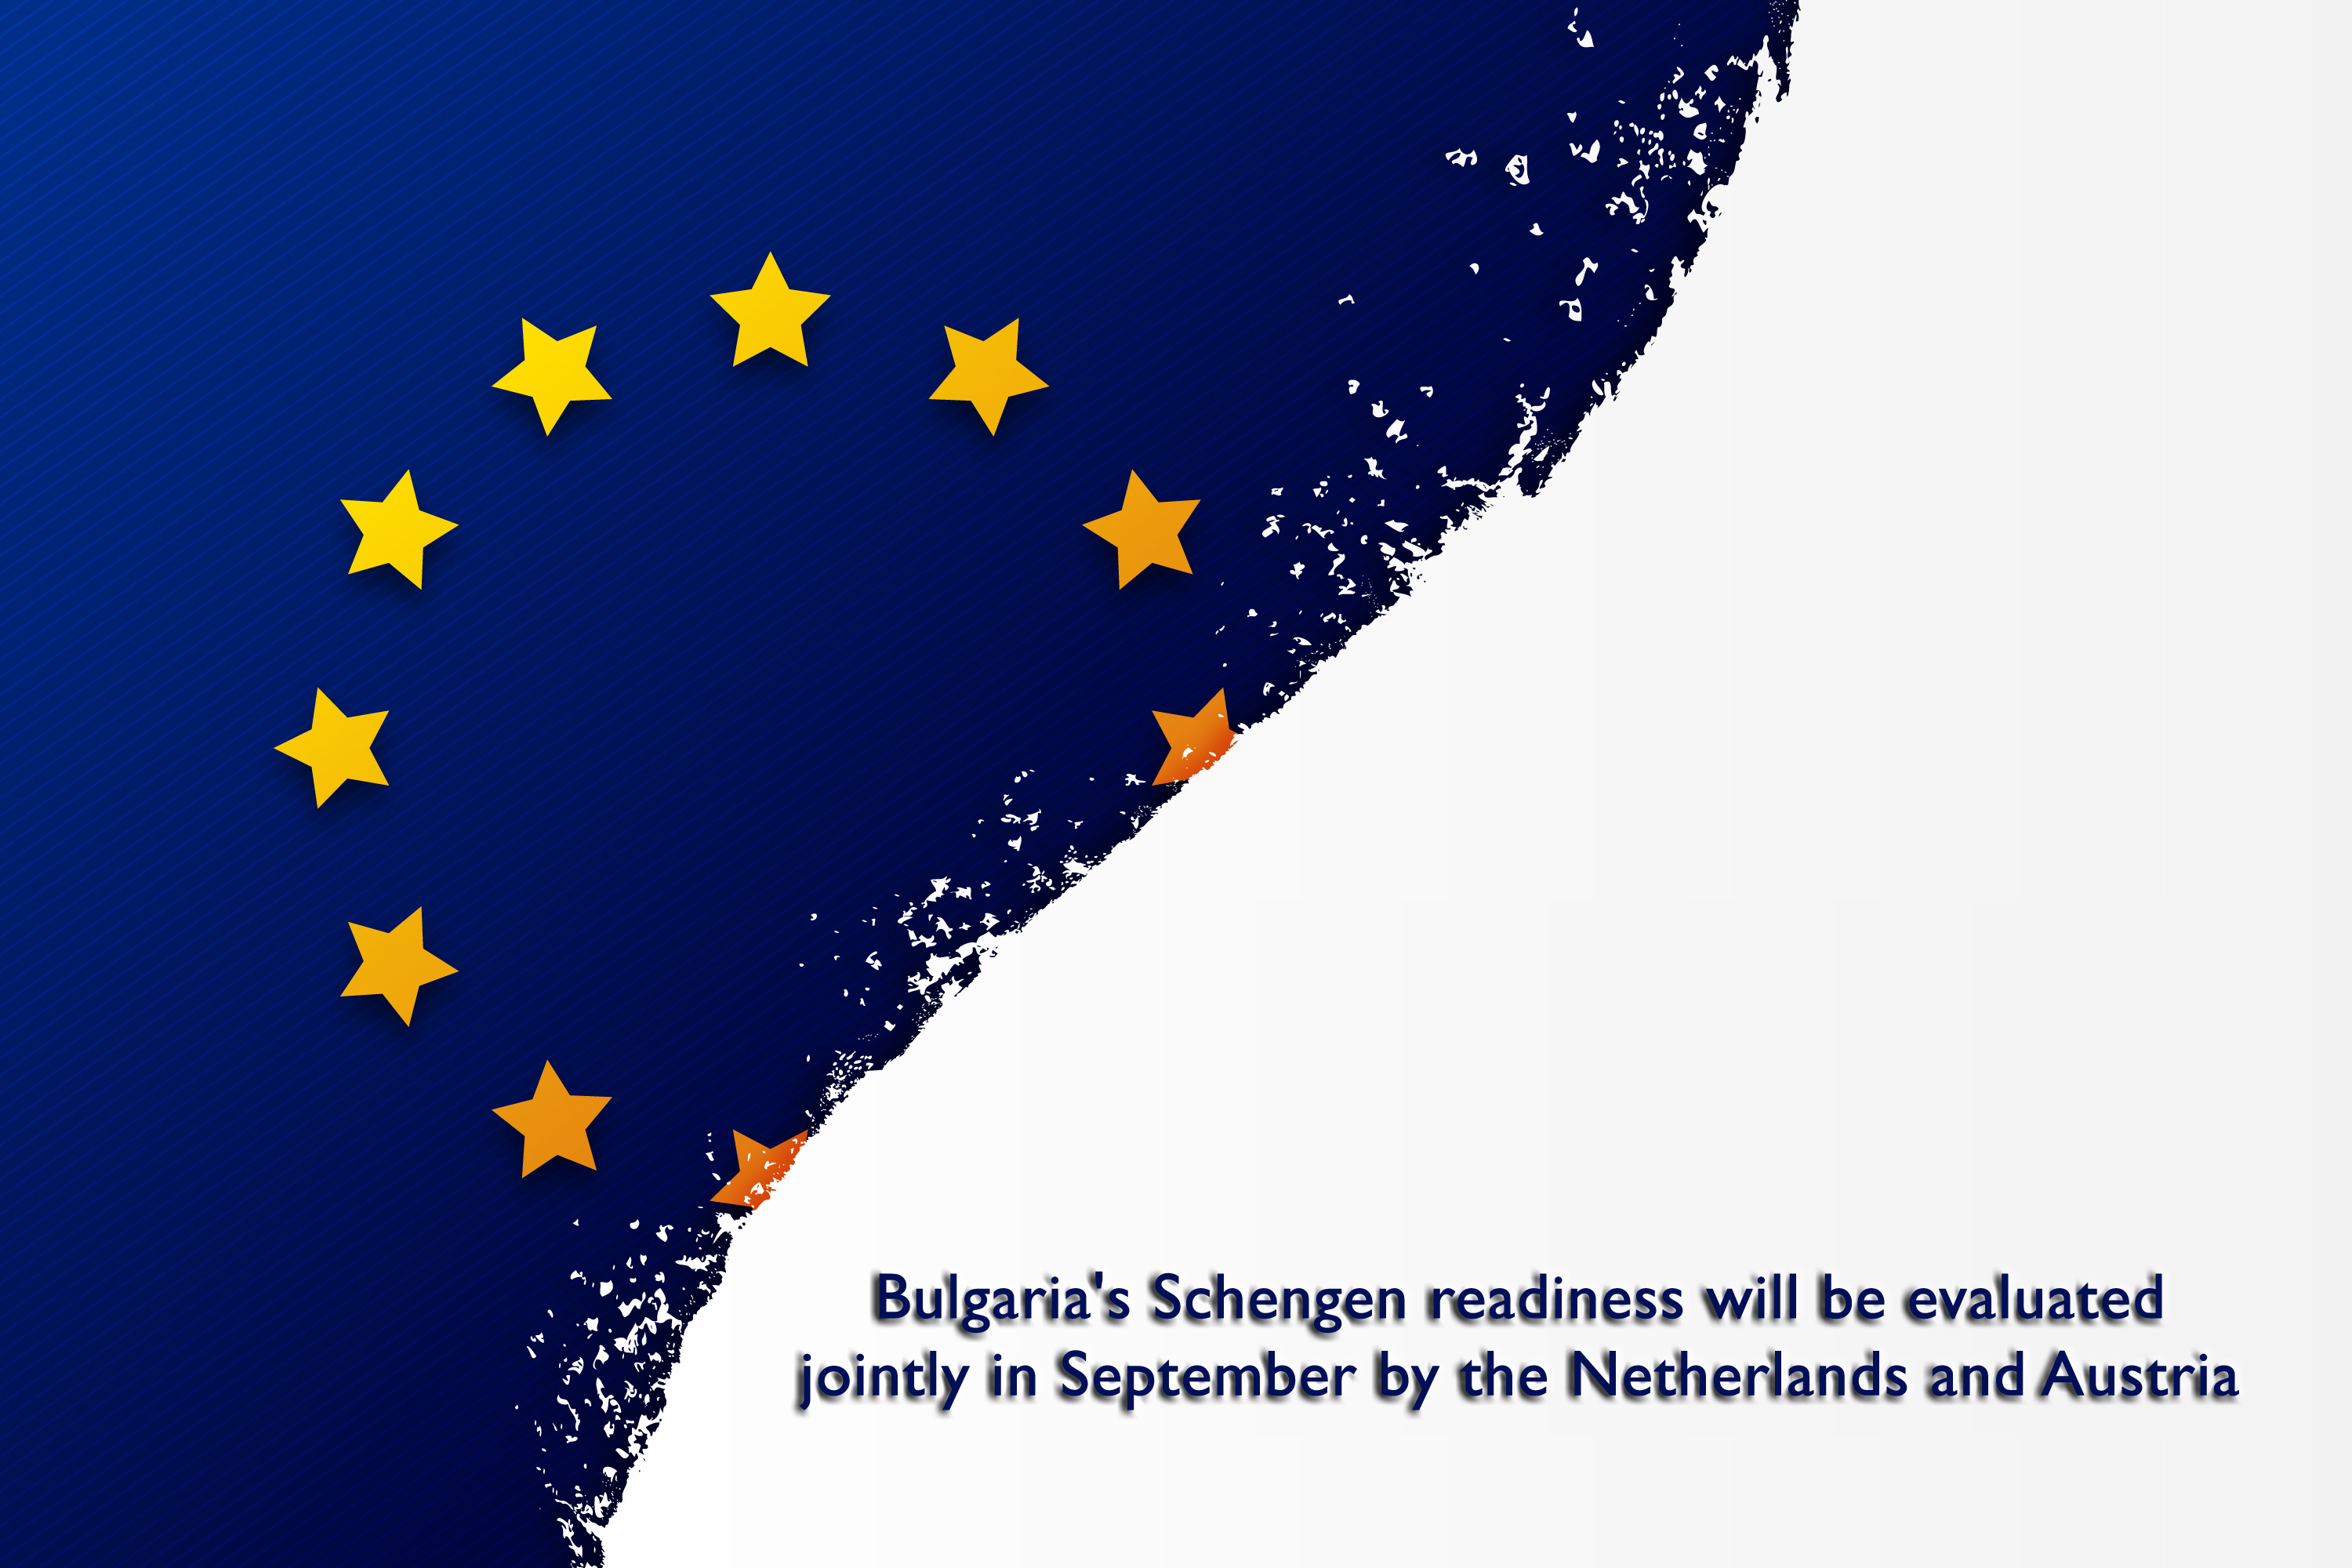 Bulgarias Schengen readiness will be evaluated jointly in September by the Netherlands and Austria